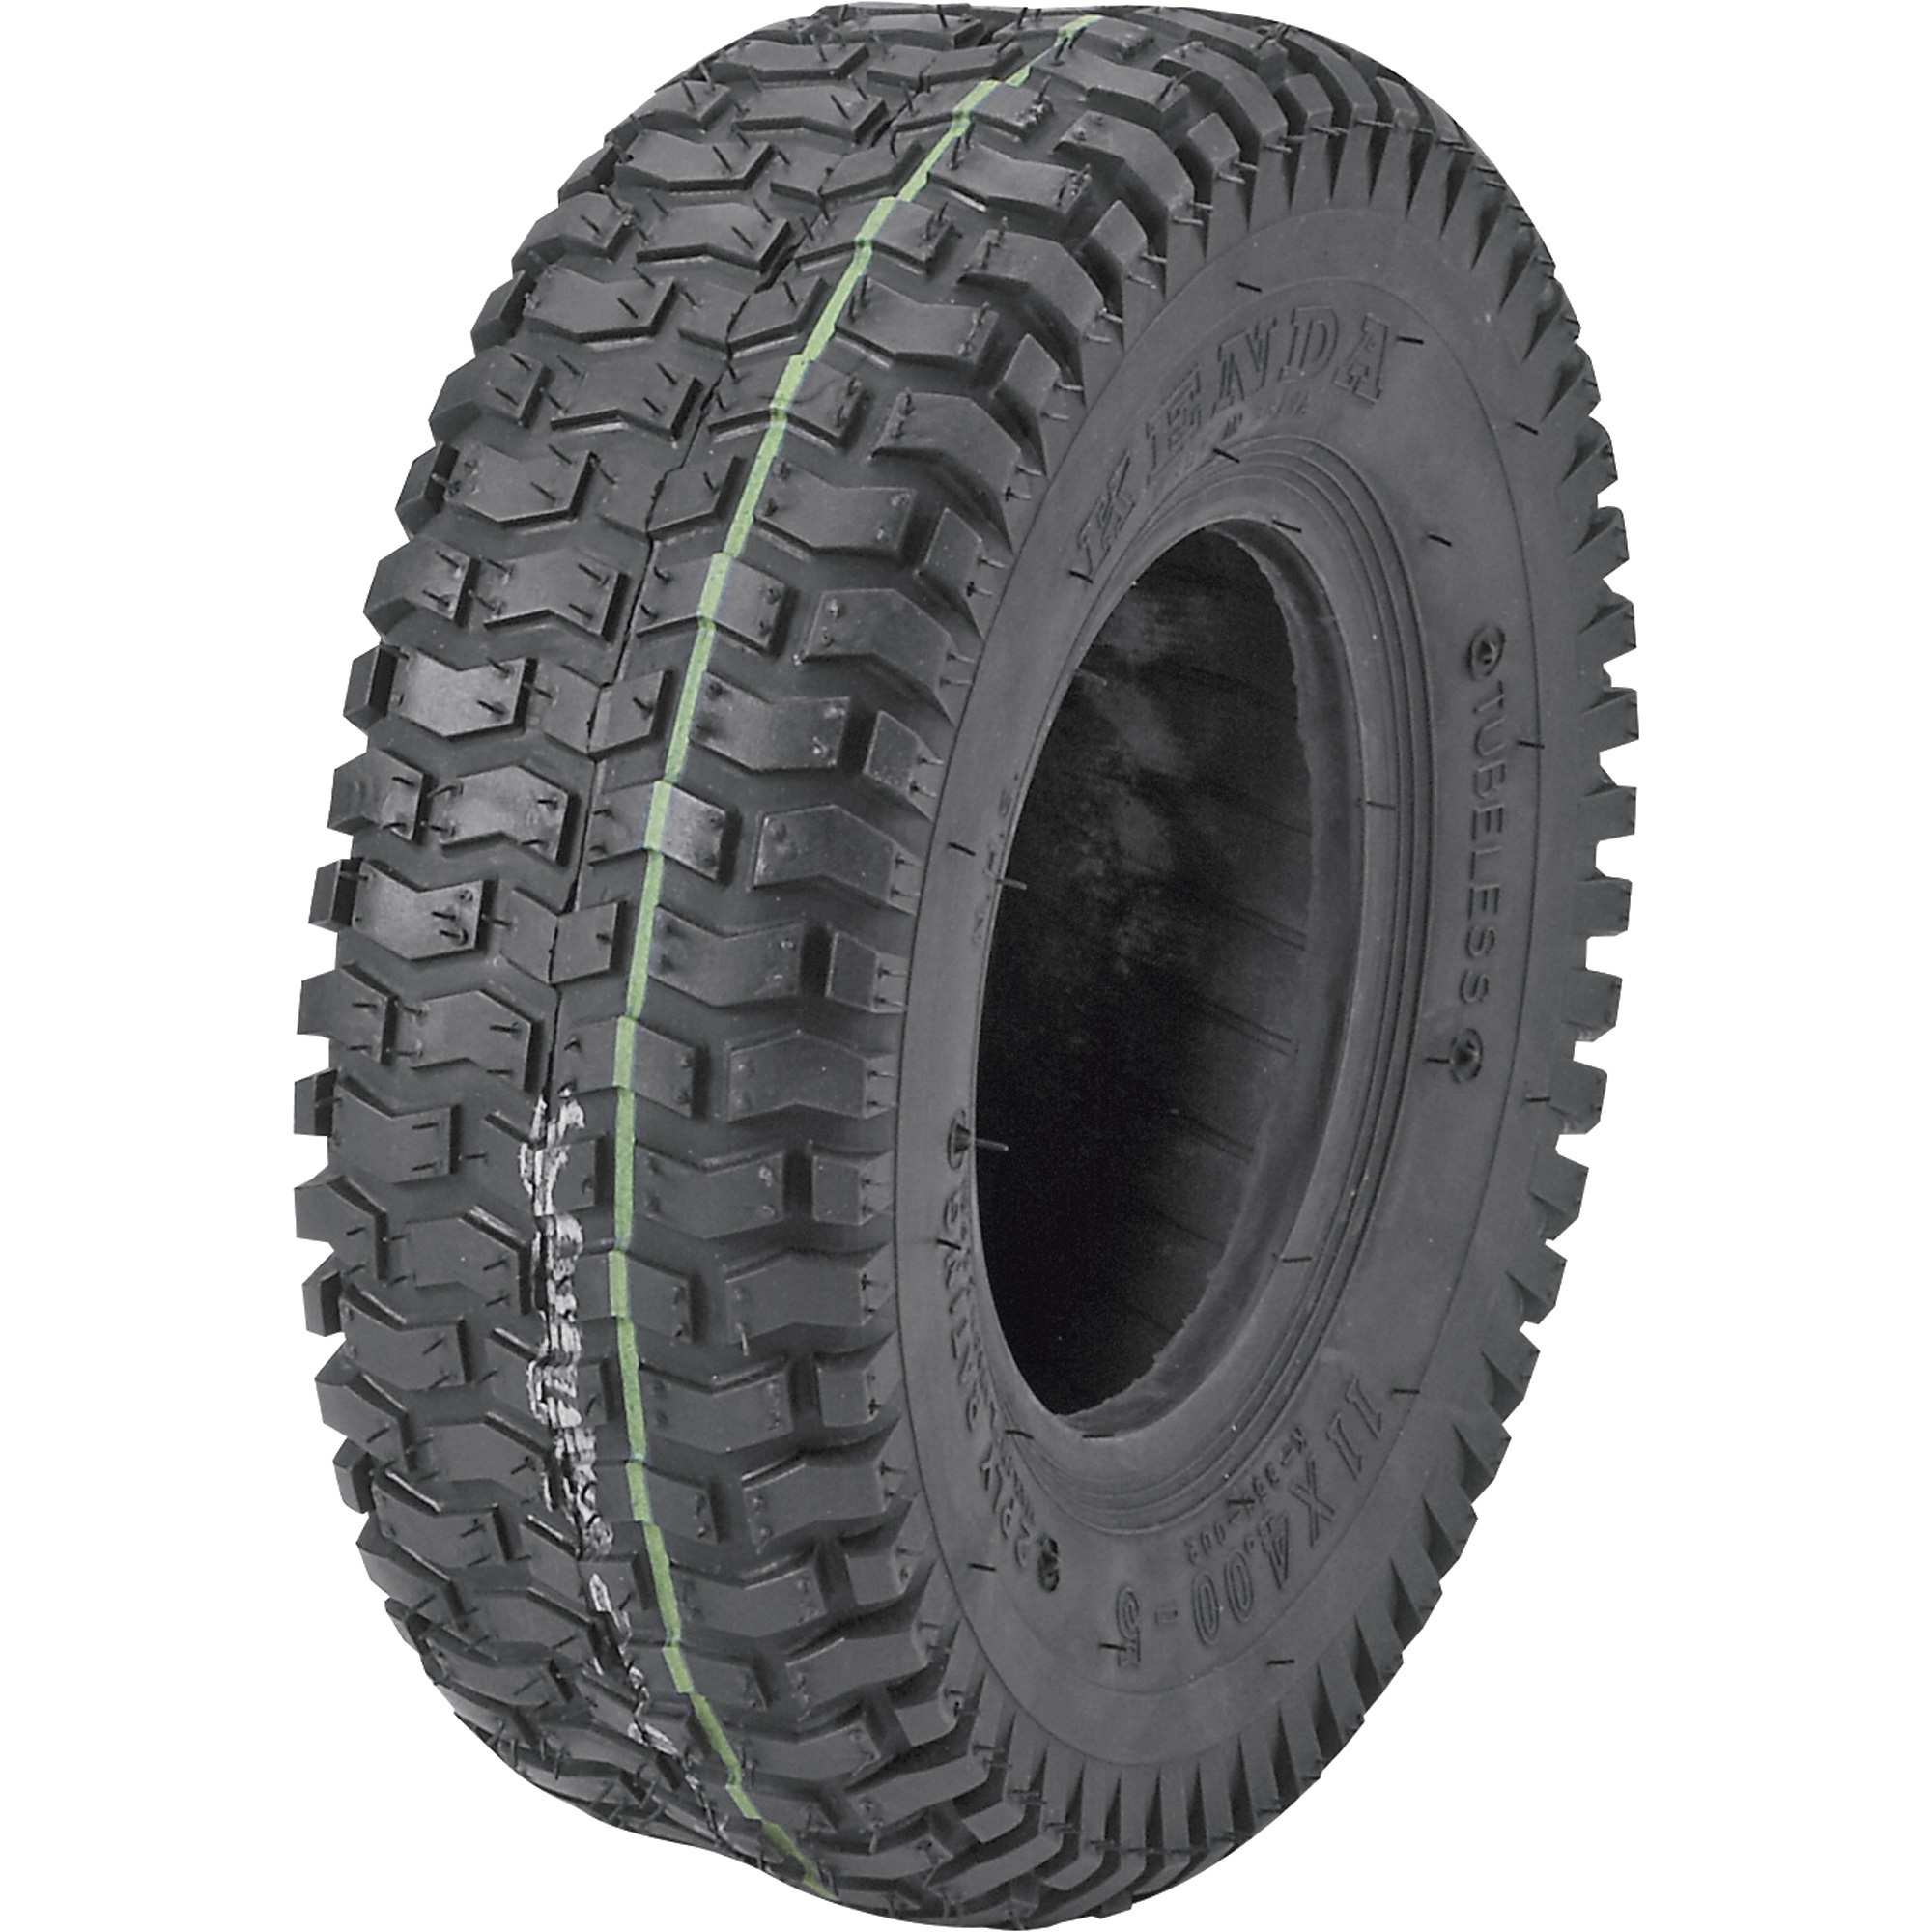 Lawn and Garden Tractor Tubeless Replacement Turf Tire â 13 x 6.50â6